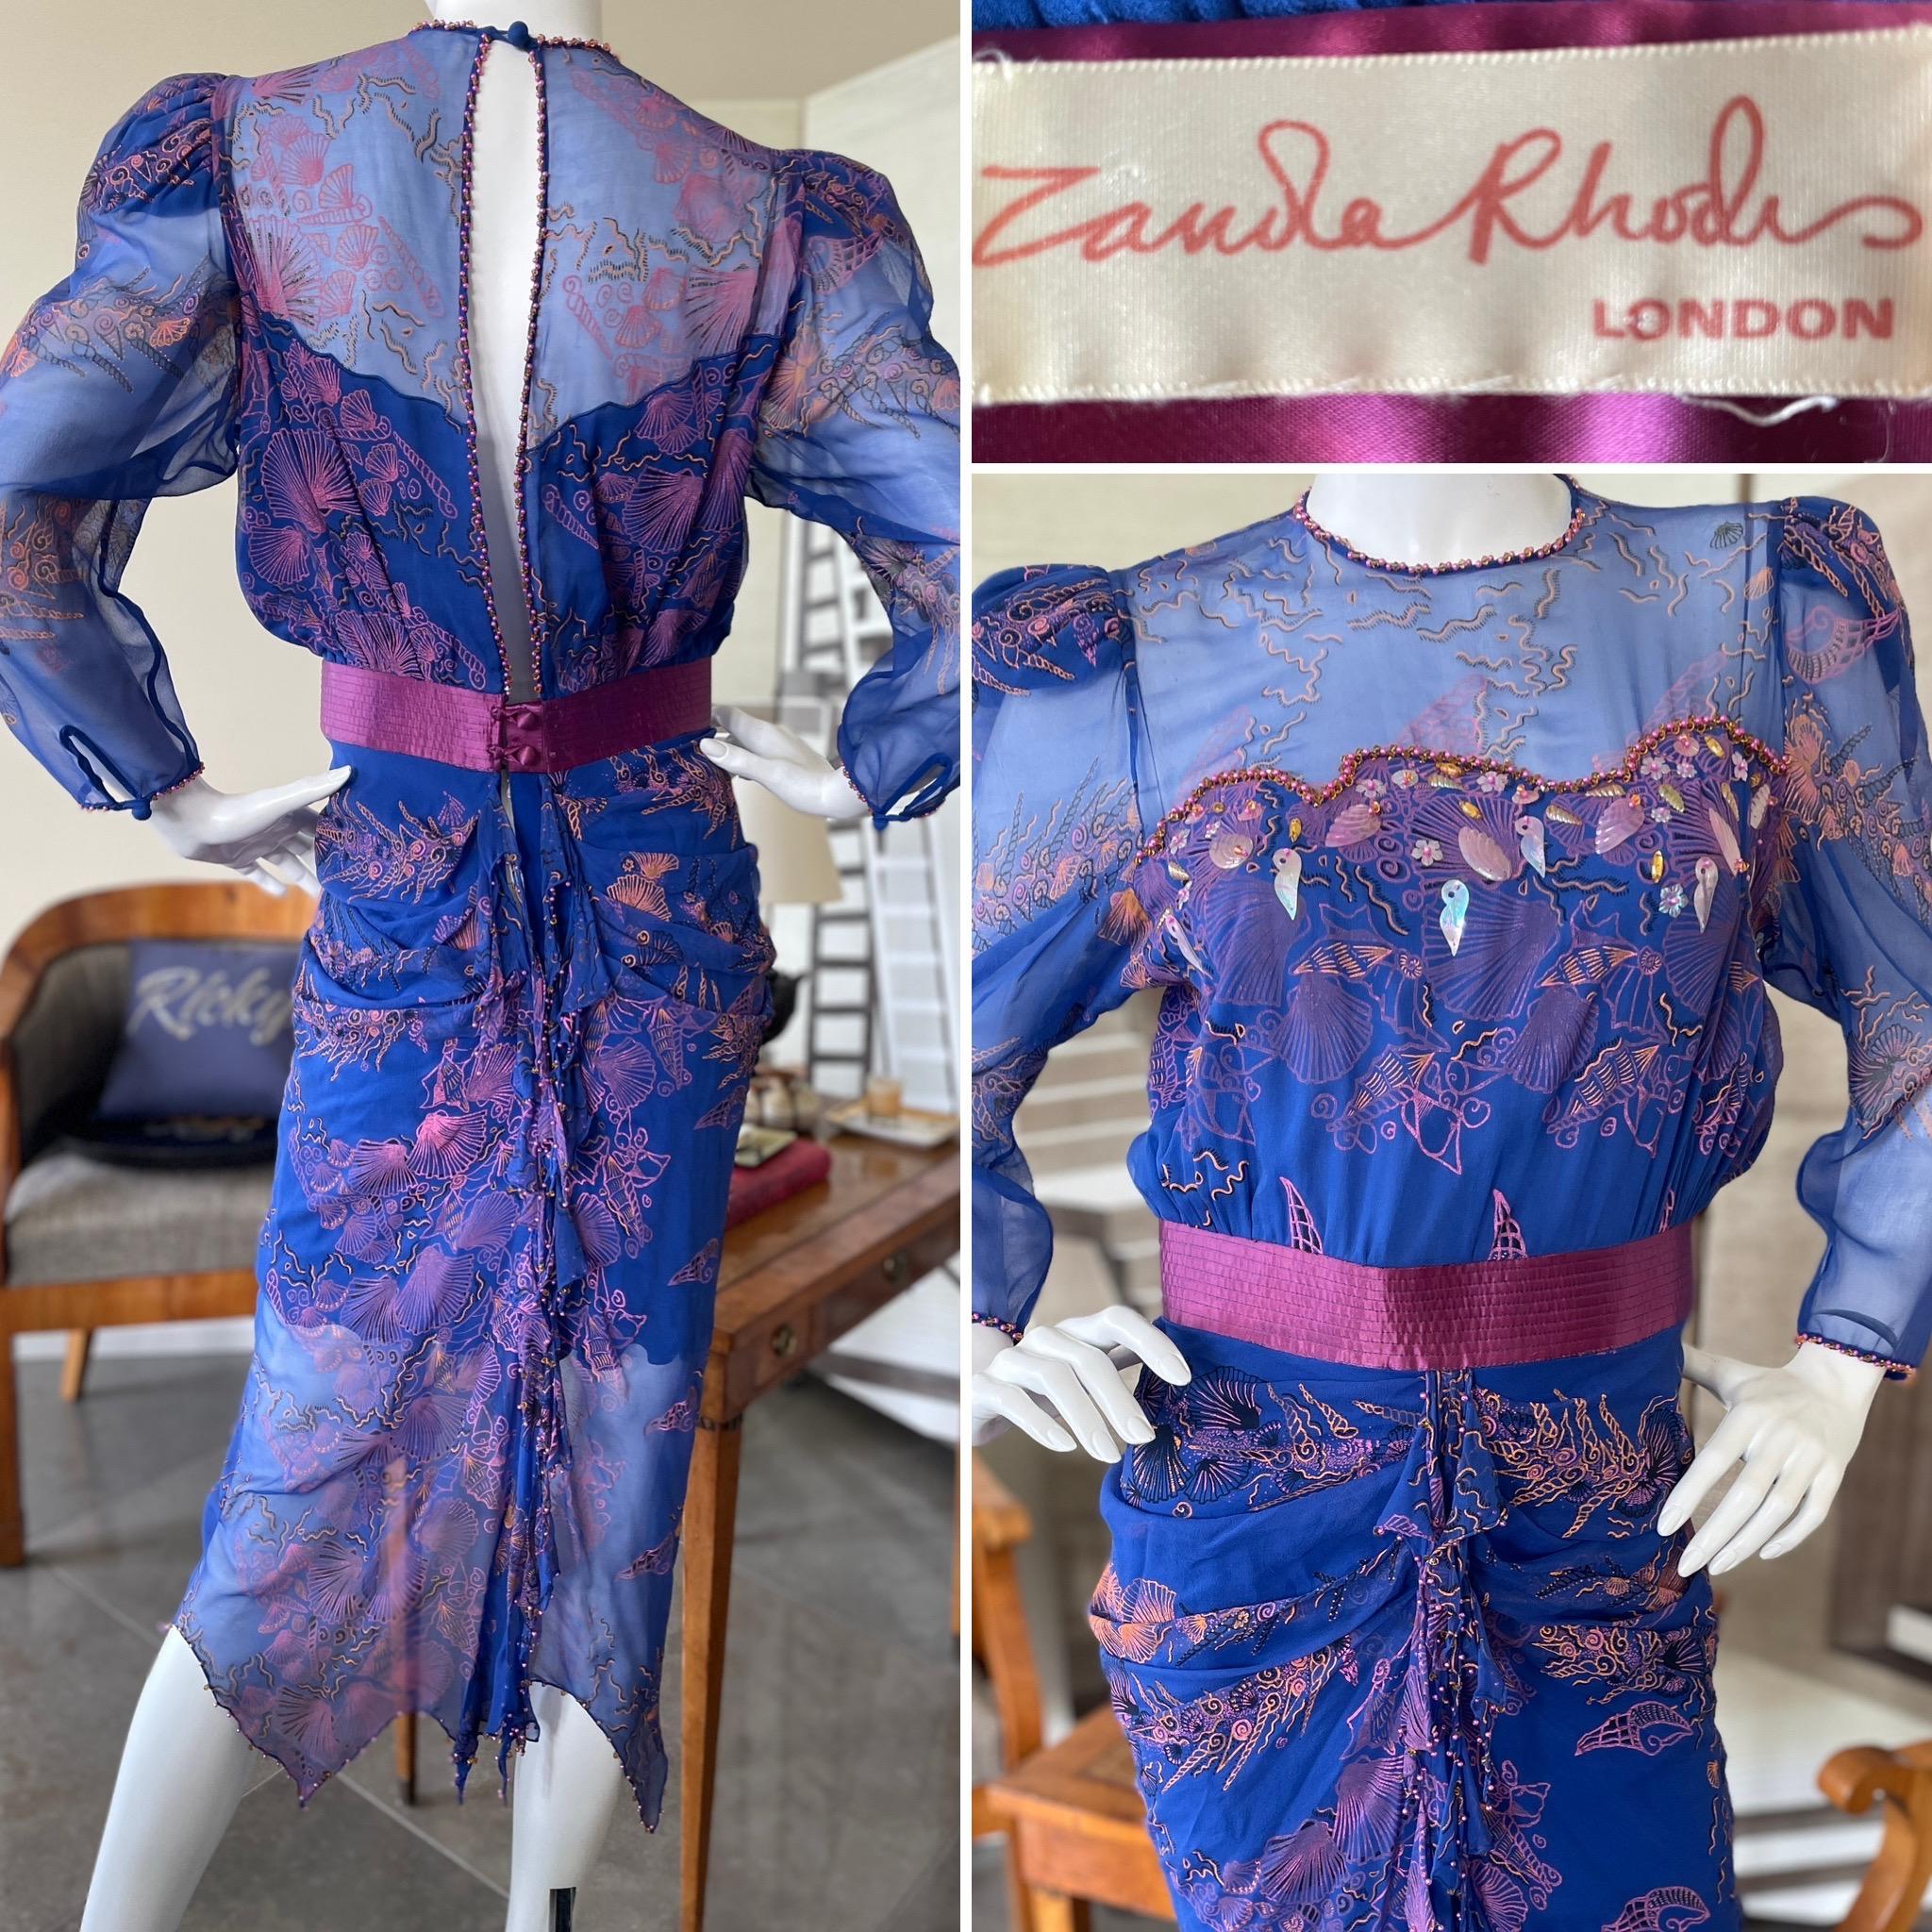 Zandra Rhodes 1970's Seashell Pattern Silk Chiffon Dress w Pearl & Crystal Trim.
Keyhole back with ruffles trimmed in crystal and pearls.
No size label (M)
Bust 39